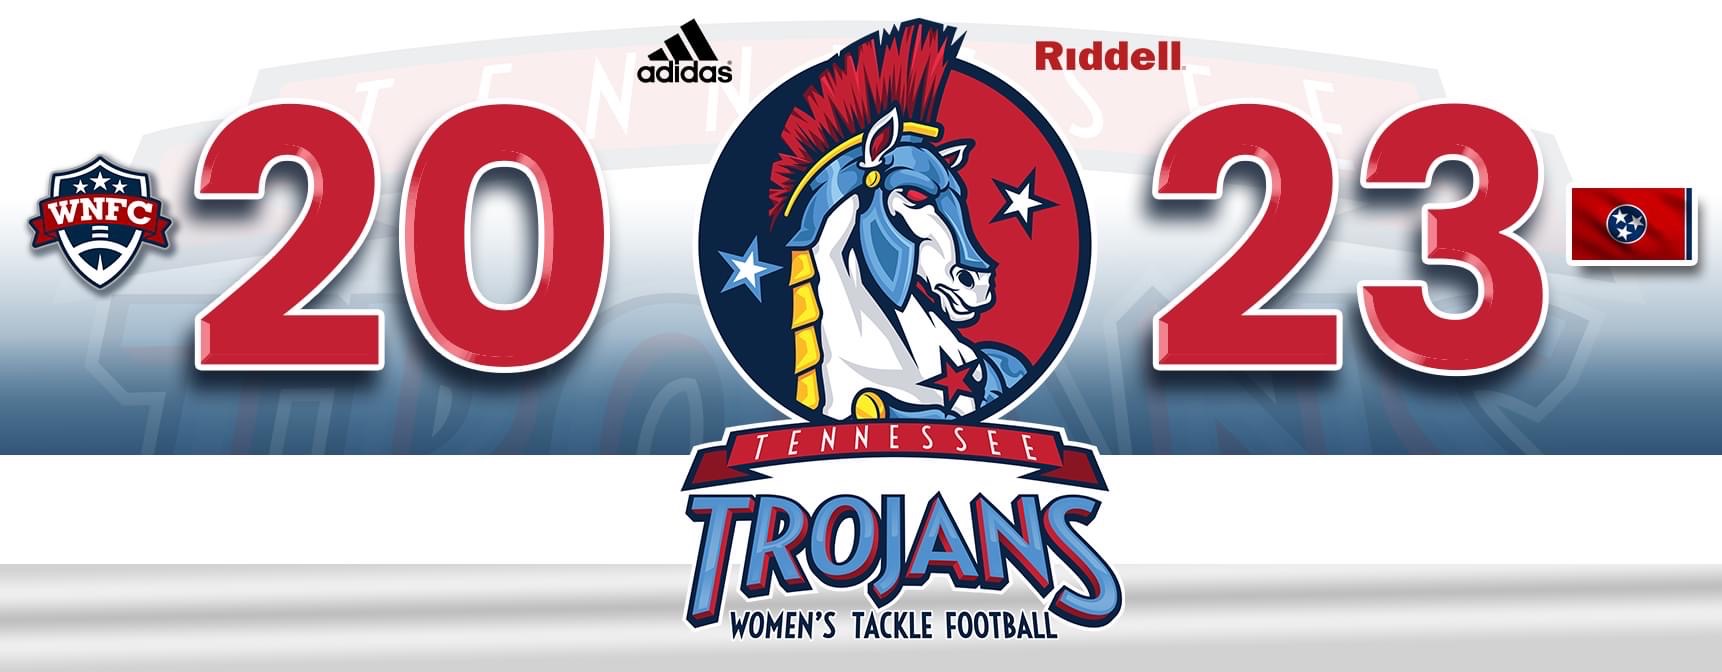 Premier Women’s Tackle Football Team Tennessee Trojans to Launch in Nashville